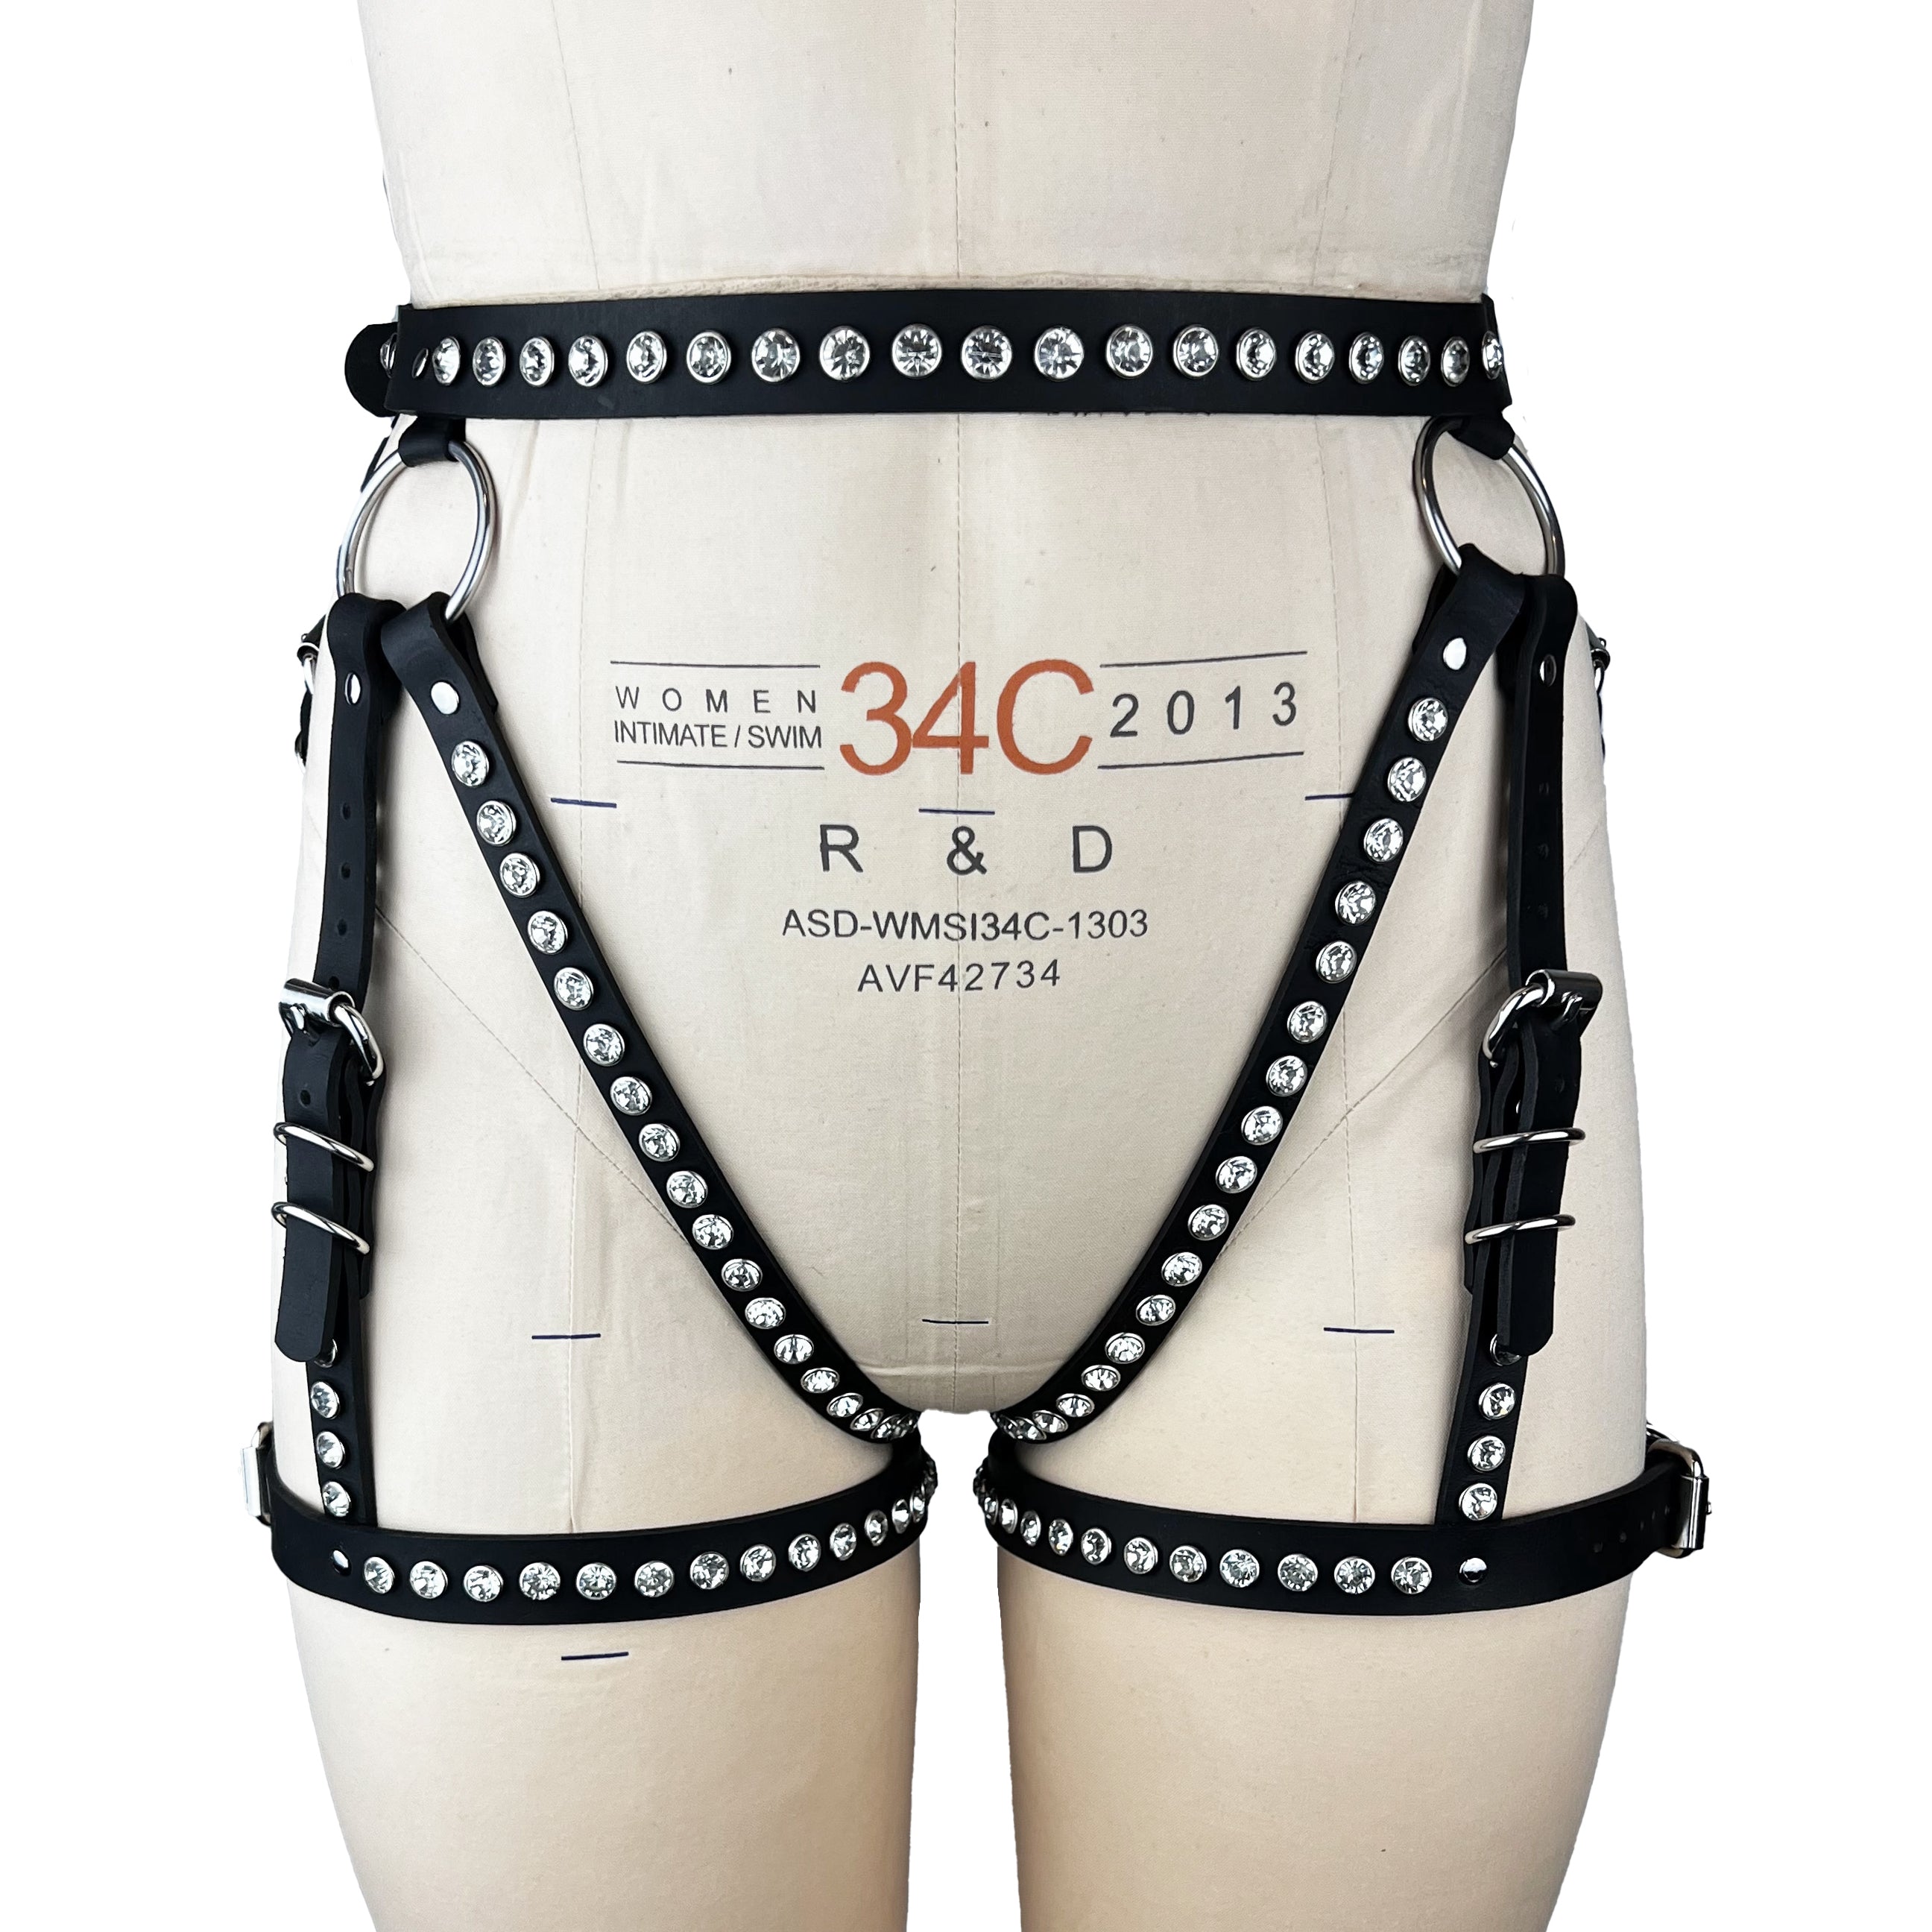 luxury Italian leather and crystal fashion and fetish women's men's booty harness, bespoke, made-to-order in nyc, front view